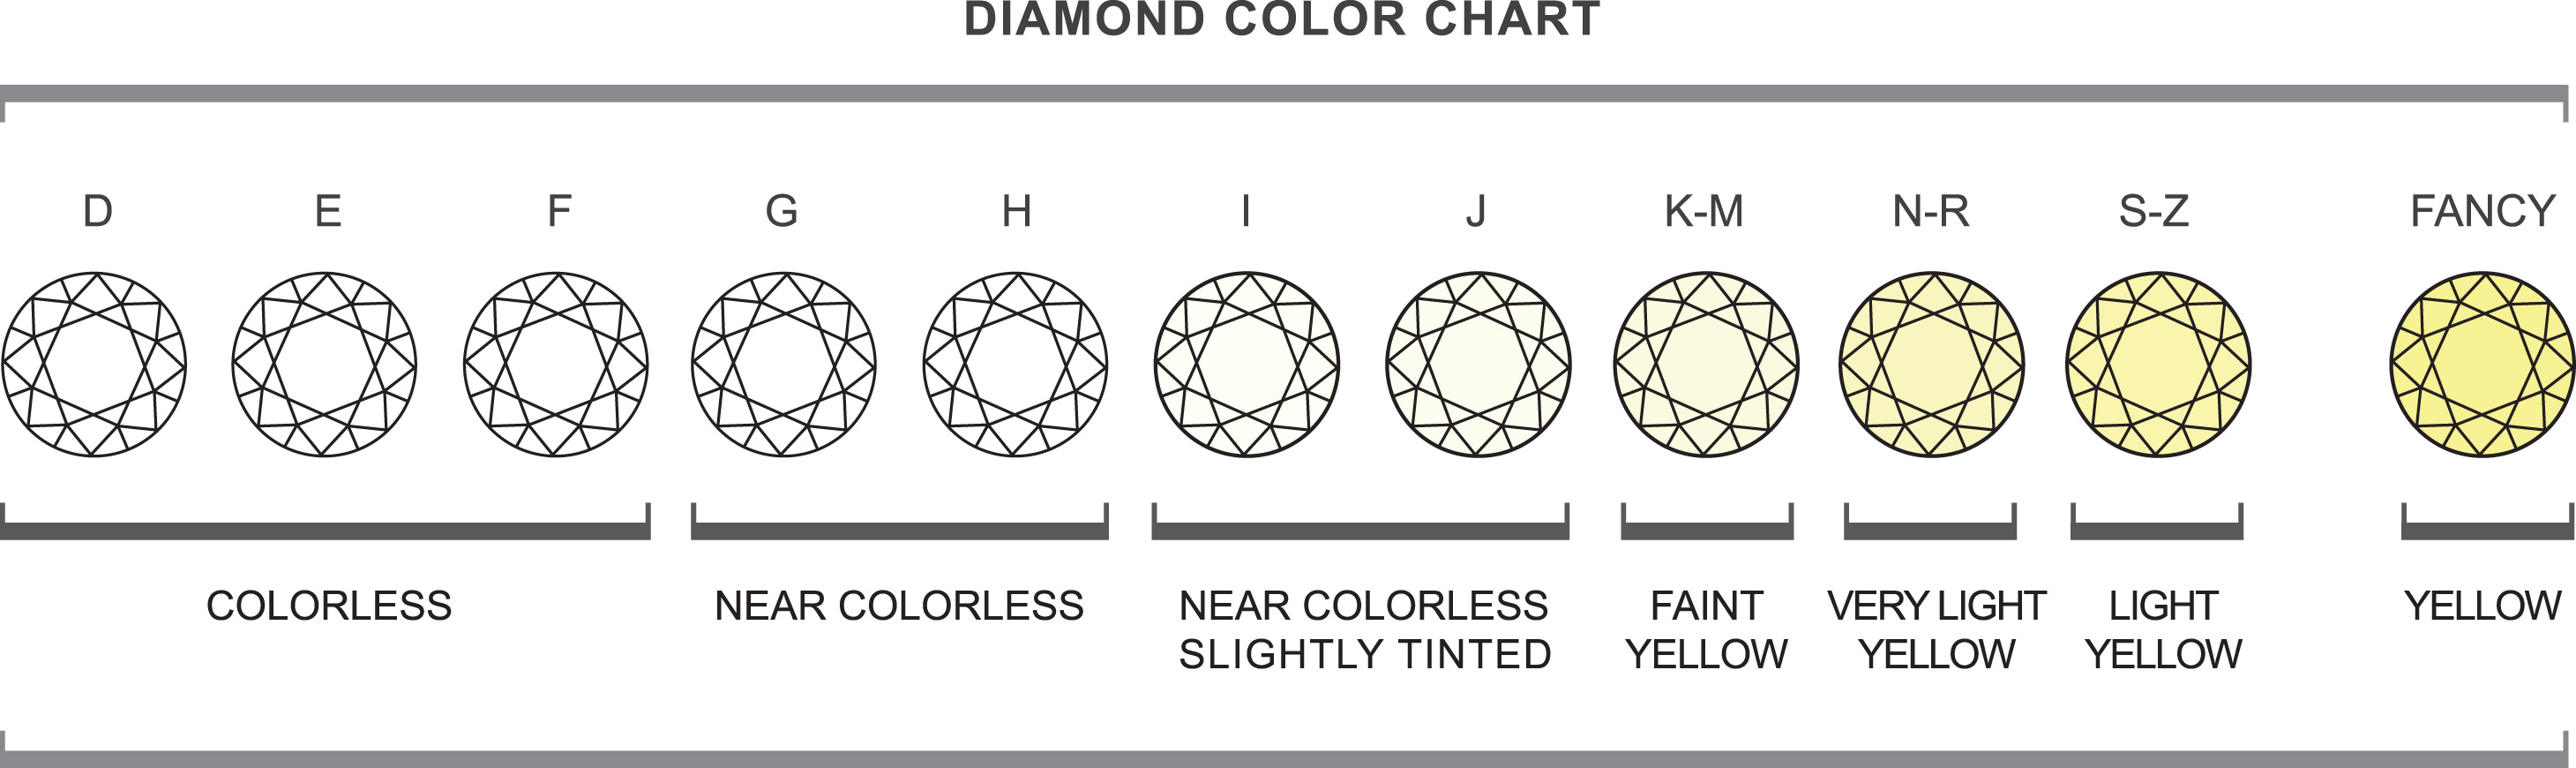 Picture of a diamond color chart.